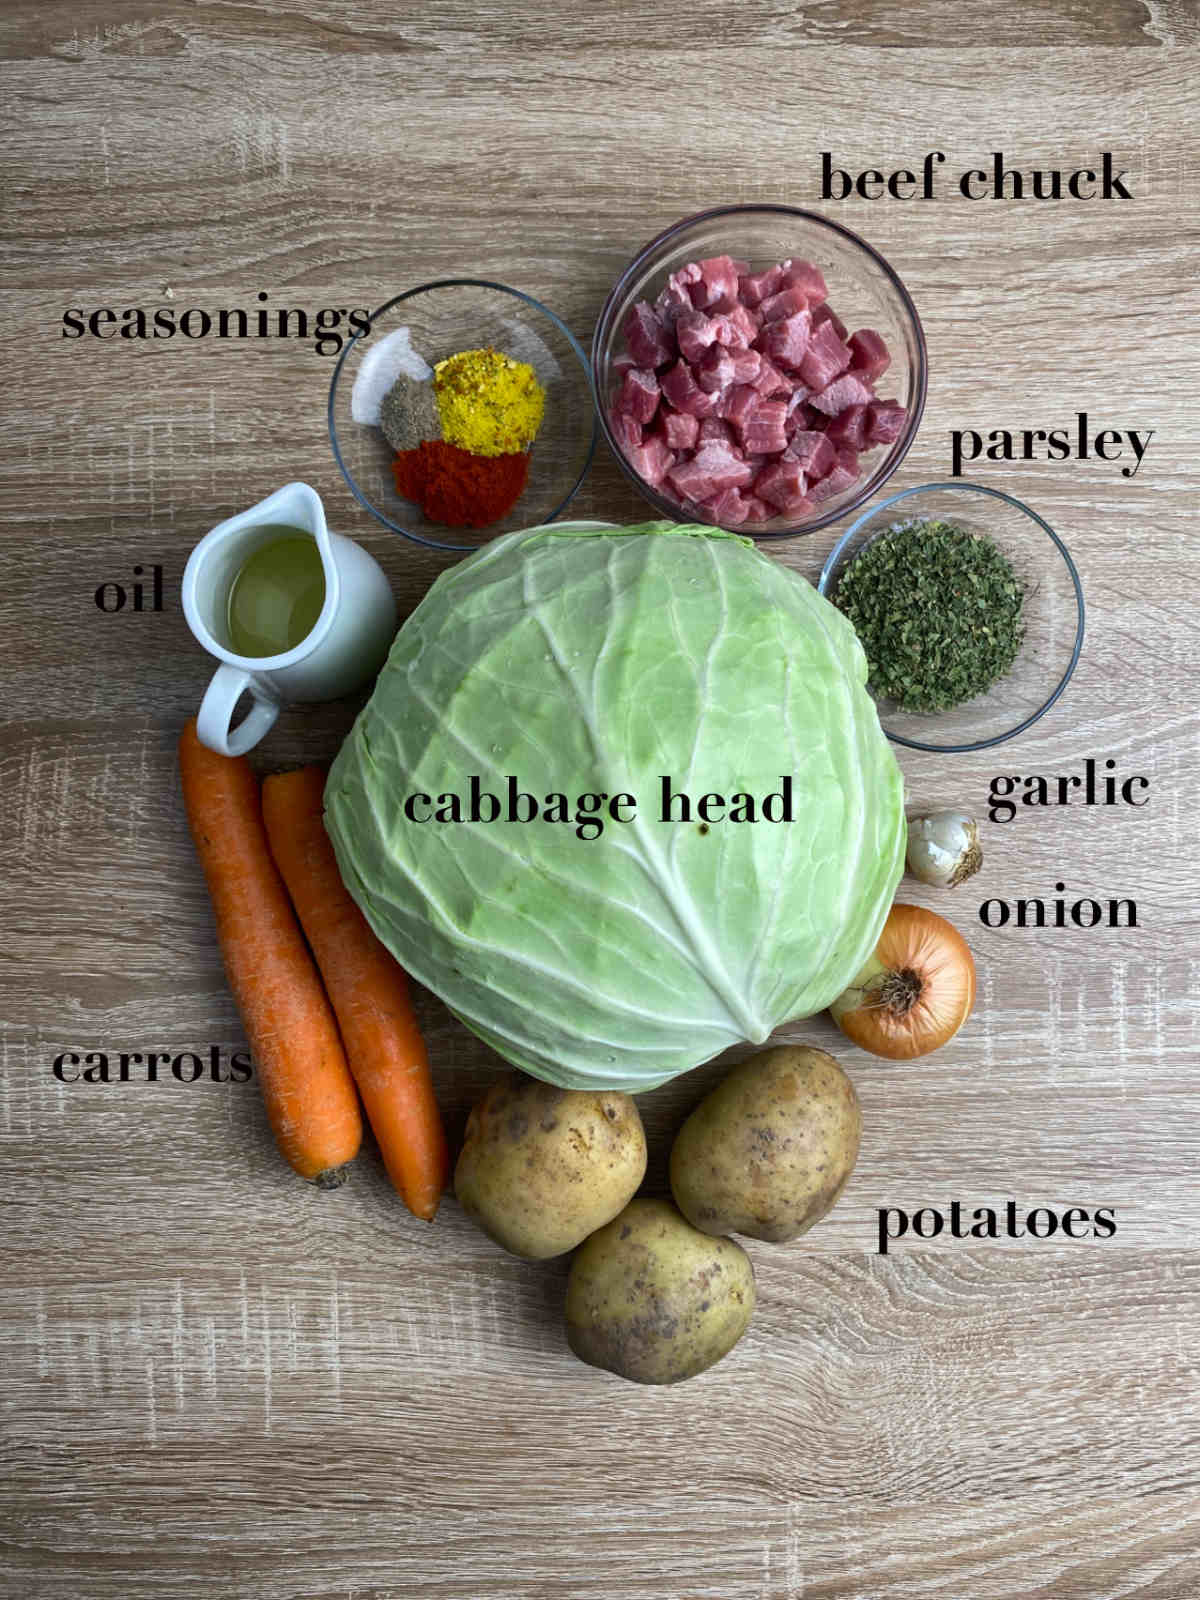 Ingredients for cabbage soup on a wooden table: cabbage, carrot, seasonings, oil, beef chuck, parsley, garlic, onion and potatoes. 